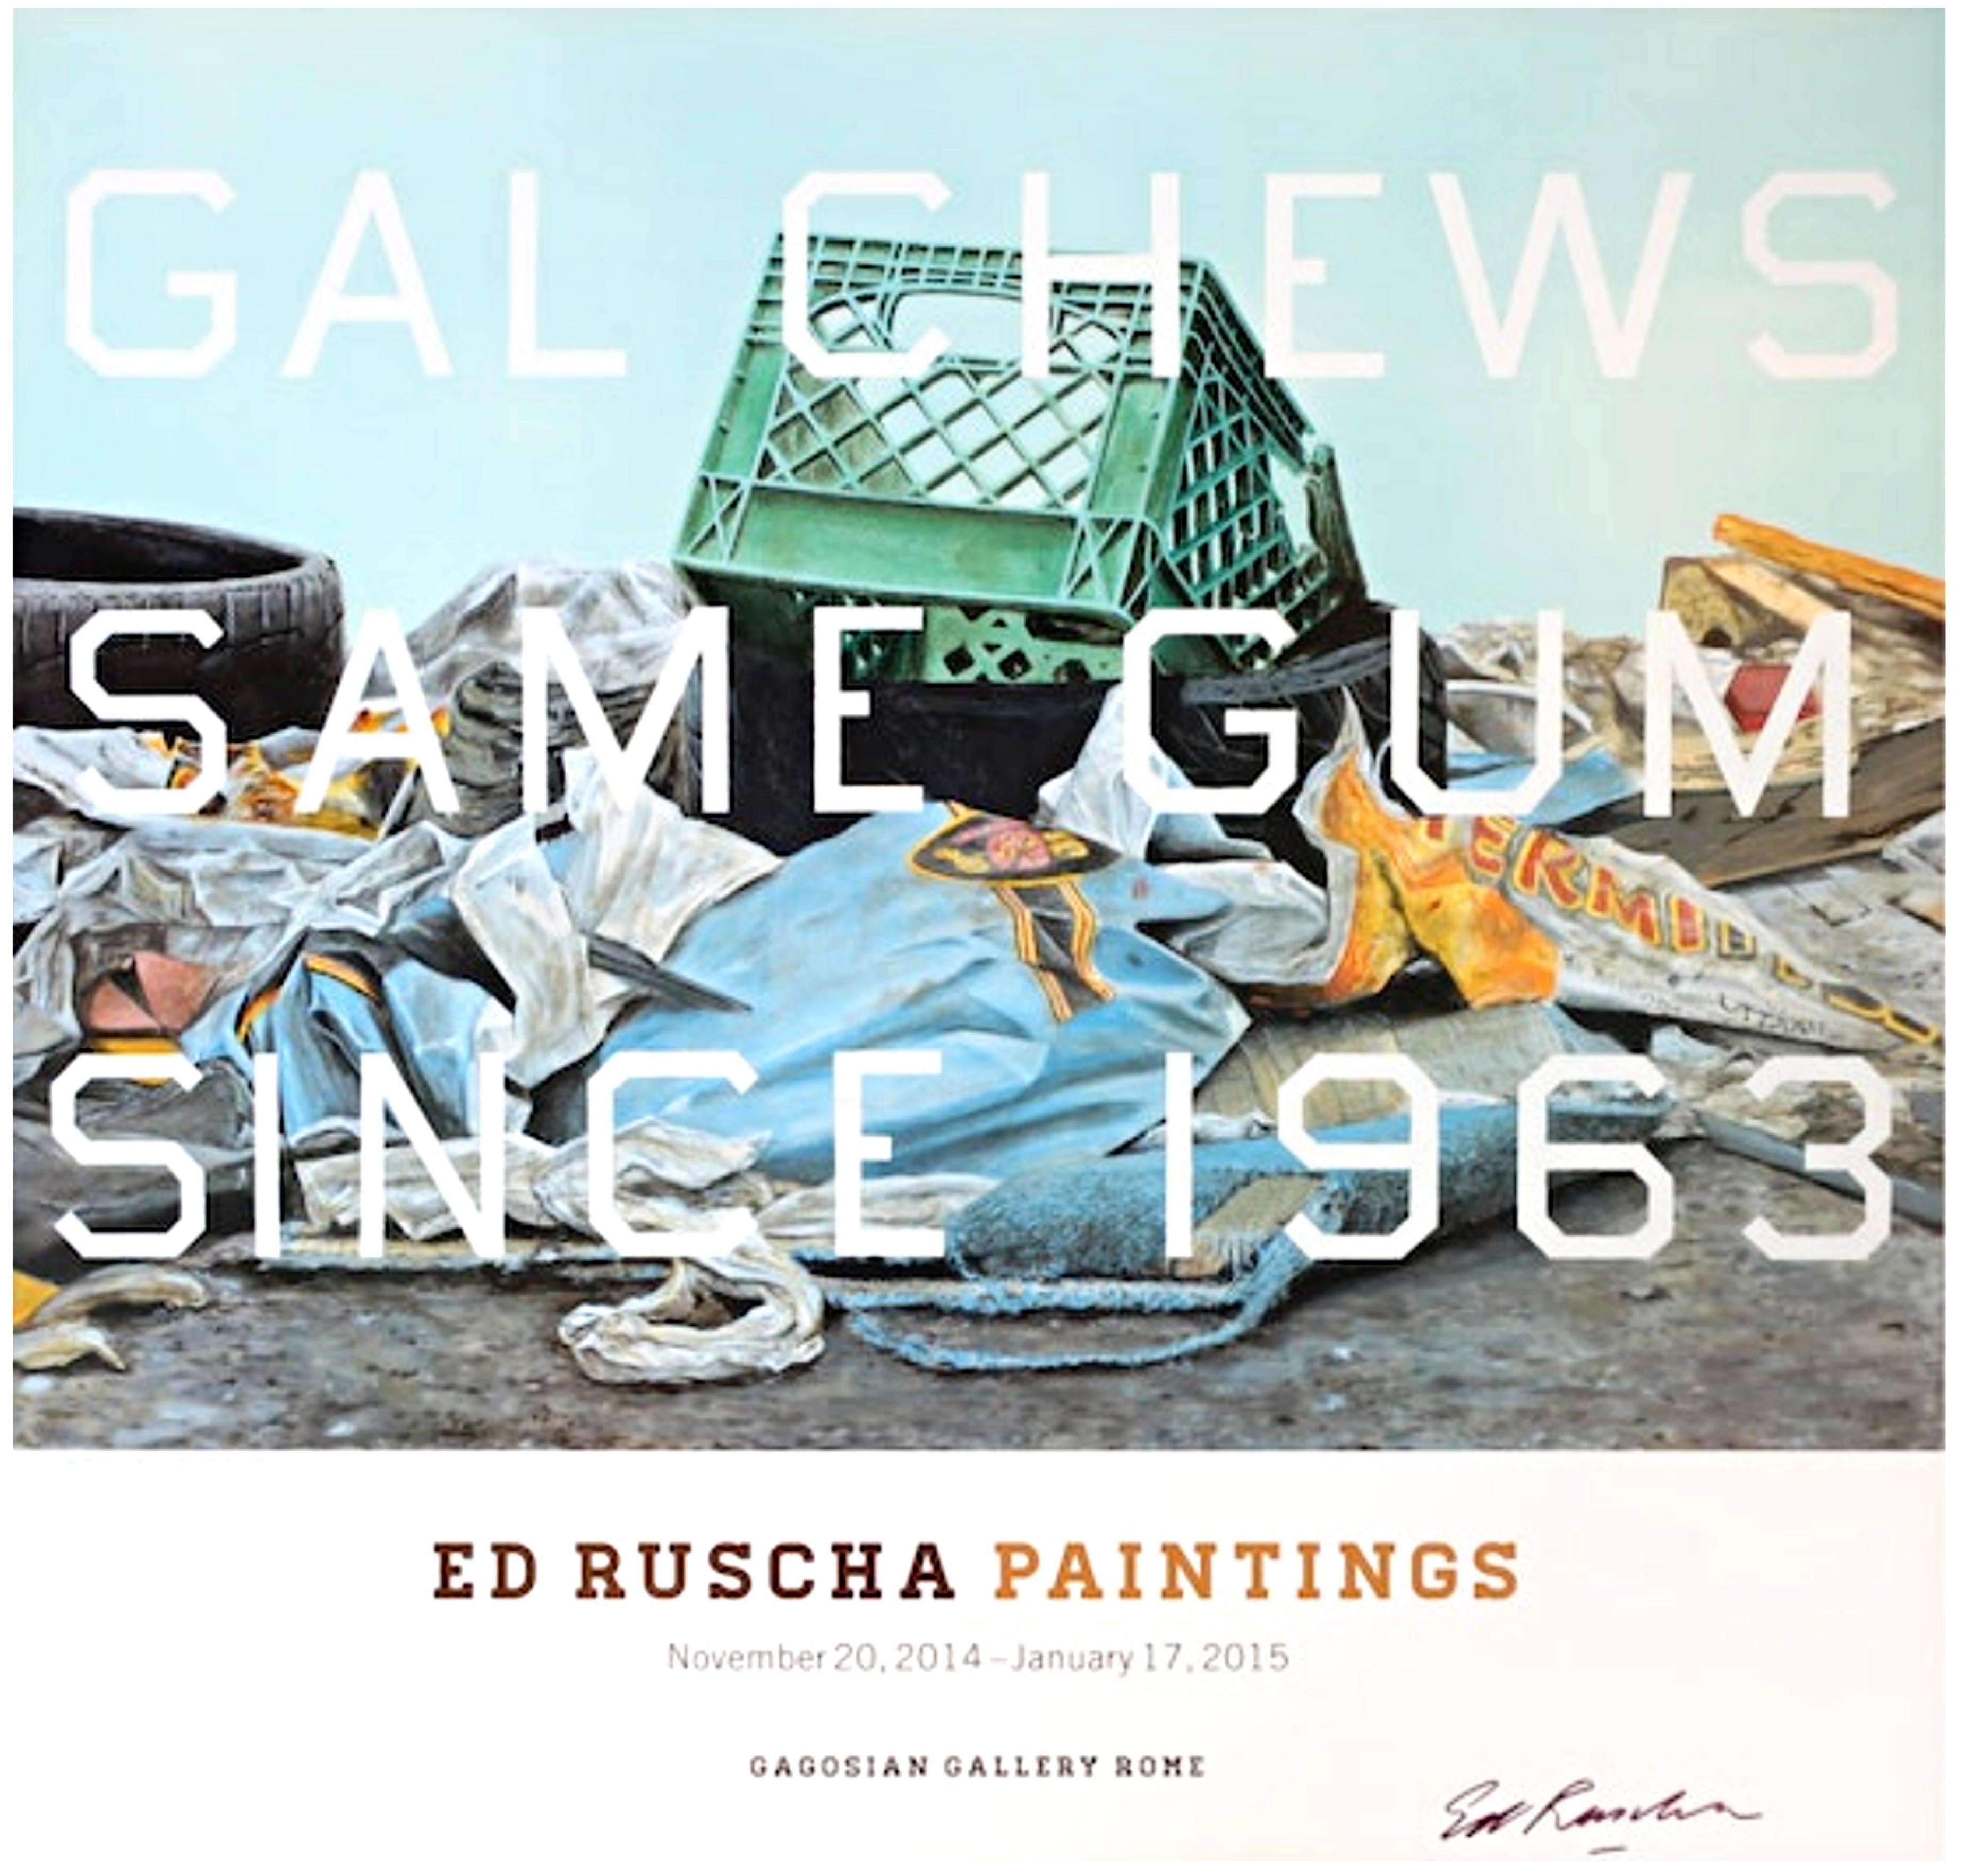 Gal Chews Same Gum Since 1965, offset lithograph poster Hand signed by Ed Ruscha